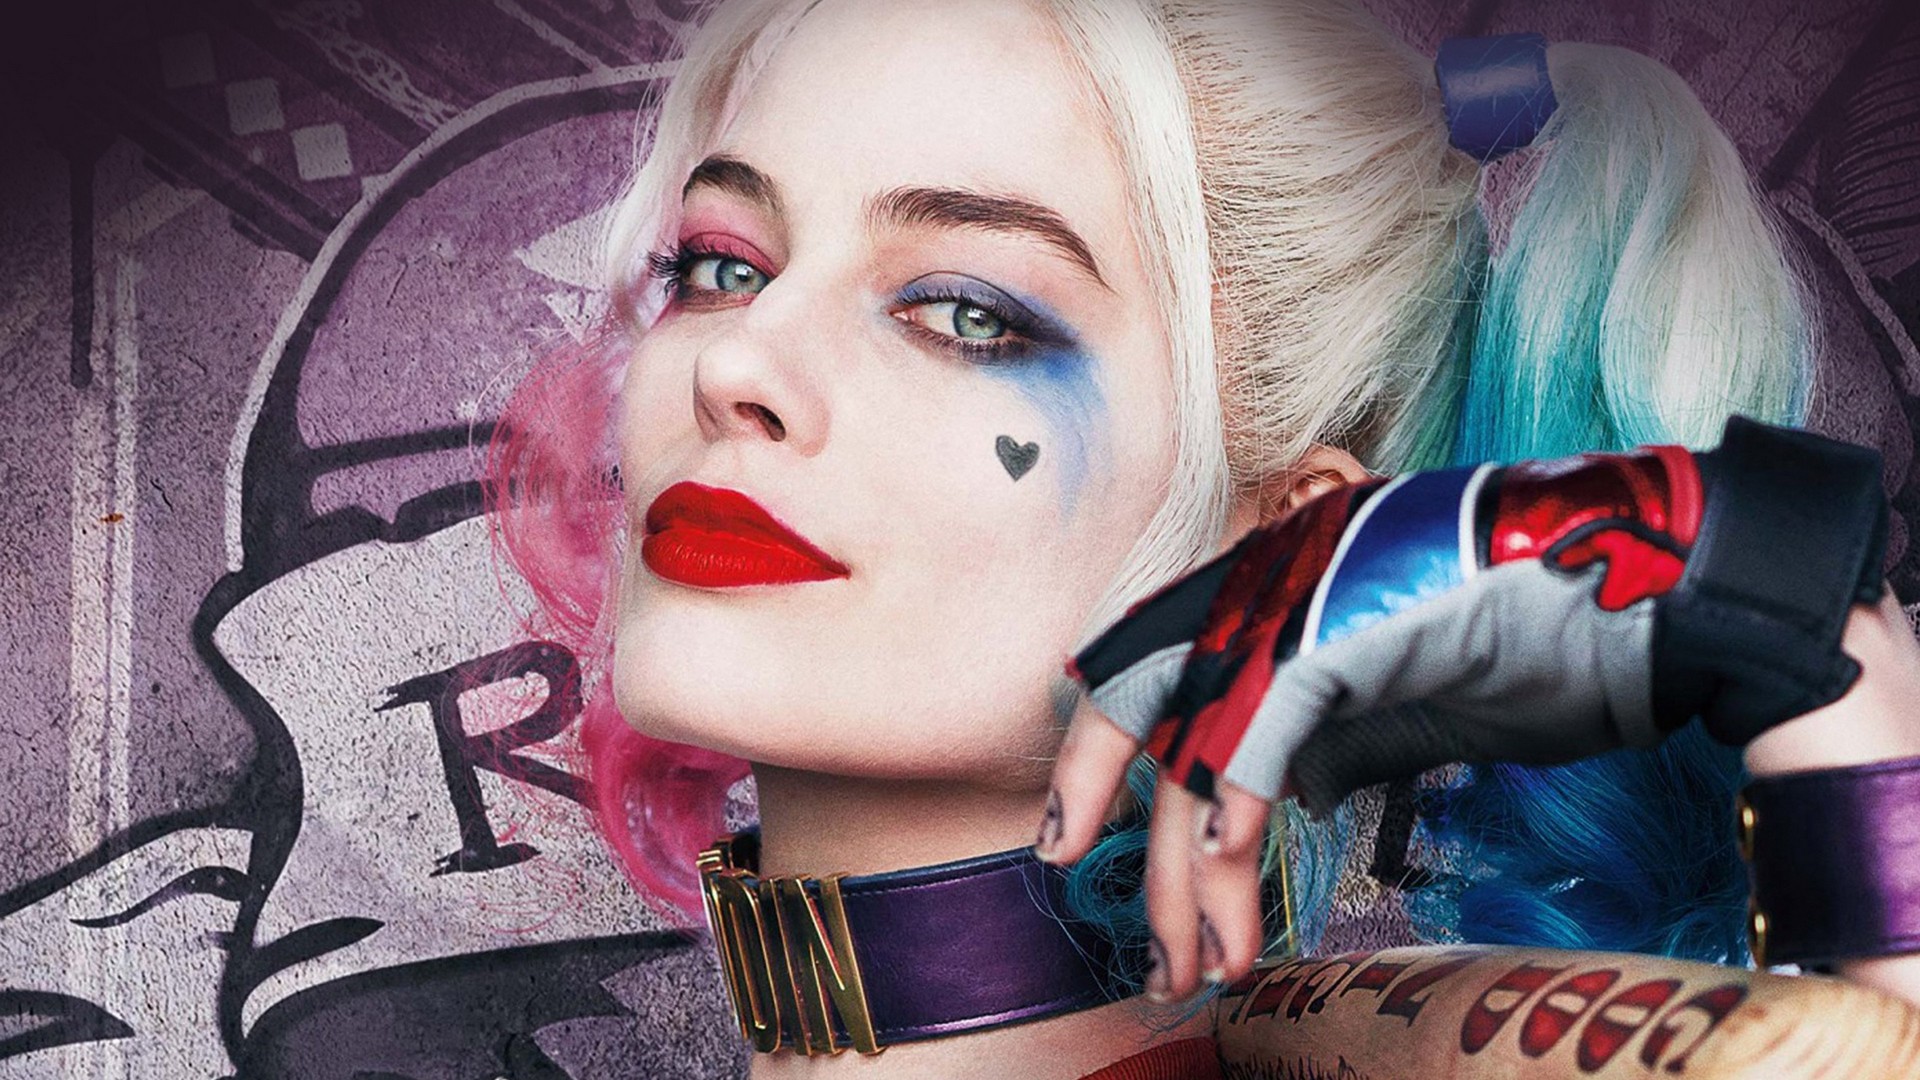 Harley Quinn Pictures Wallpaper For Desktop with resolution 1920X1080 pixel. You can use this wallpaper as background for your desktop Computer Screensavers, Android or iPhone smartphones